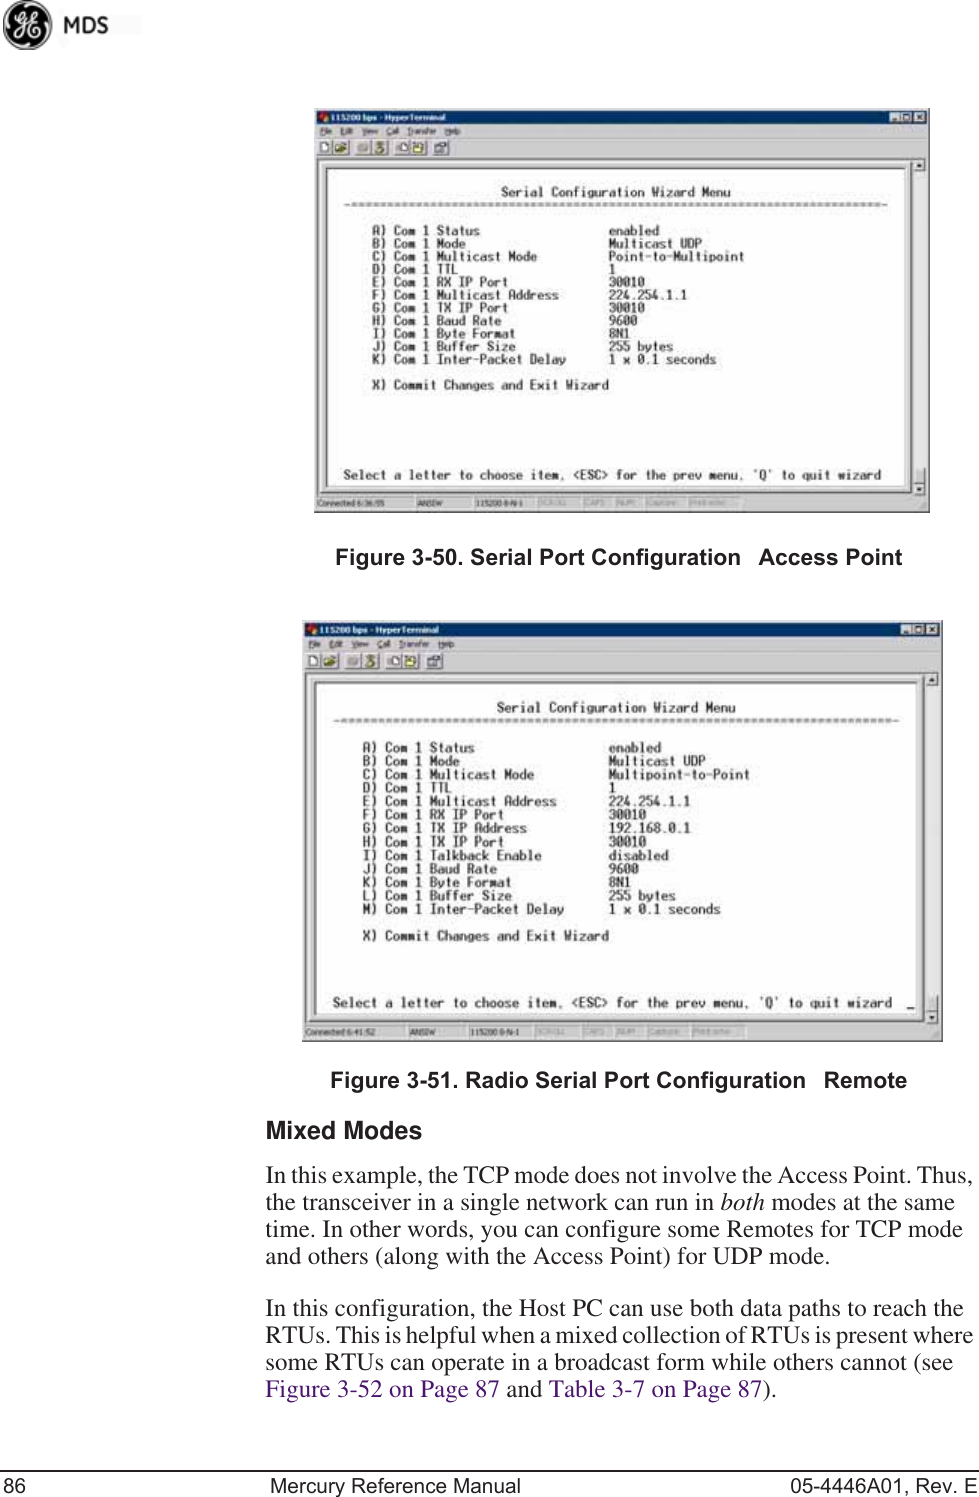 86 Mercury Reference Manual 05-4446A01, Rev. EFigure 3-50. Serial Port ConfigurationAccess PointFigure 3-51. Radio Serial Port ConfigurationRemoteMixed ModesIn this example, the TCP mode does not involve the Access Point. Thus, the transceiver in a single network can run in both modes at the same time. In other words, you can configure some Remotes for TCP mode and others (along with the Access Point) for UDP mode.In this configuration, the Host PC can use both data paths to reach the RTUs. This is helpful when a mixed collection of RTUs is present where some RTUs can operate in a broadcast form while others cannot (see Figure 3-52 on Page 87 and Table 3-7 on Page 87).